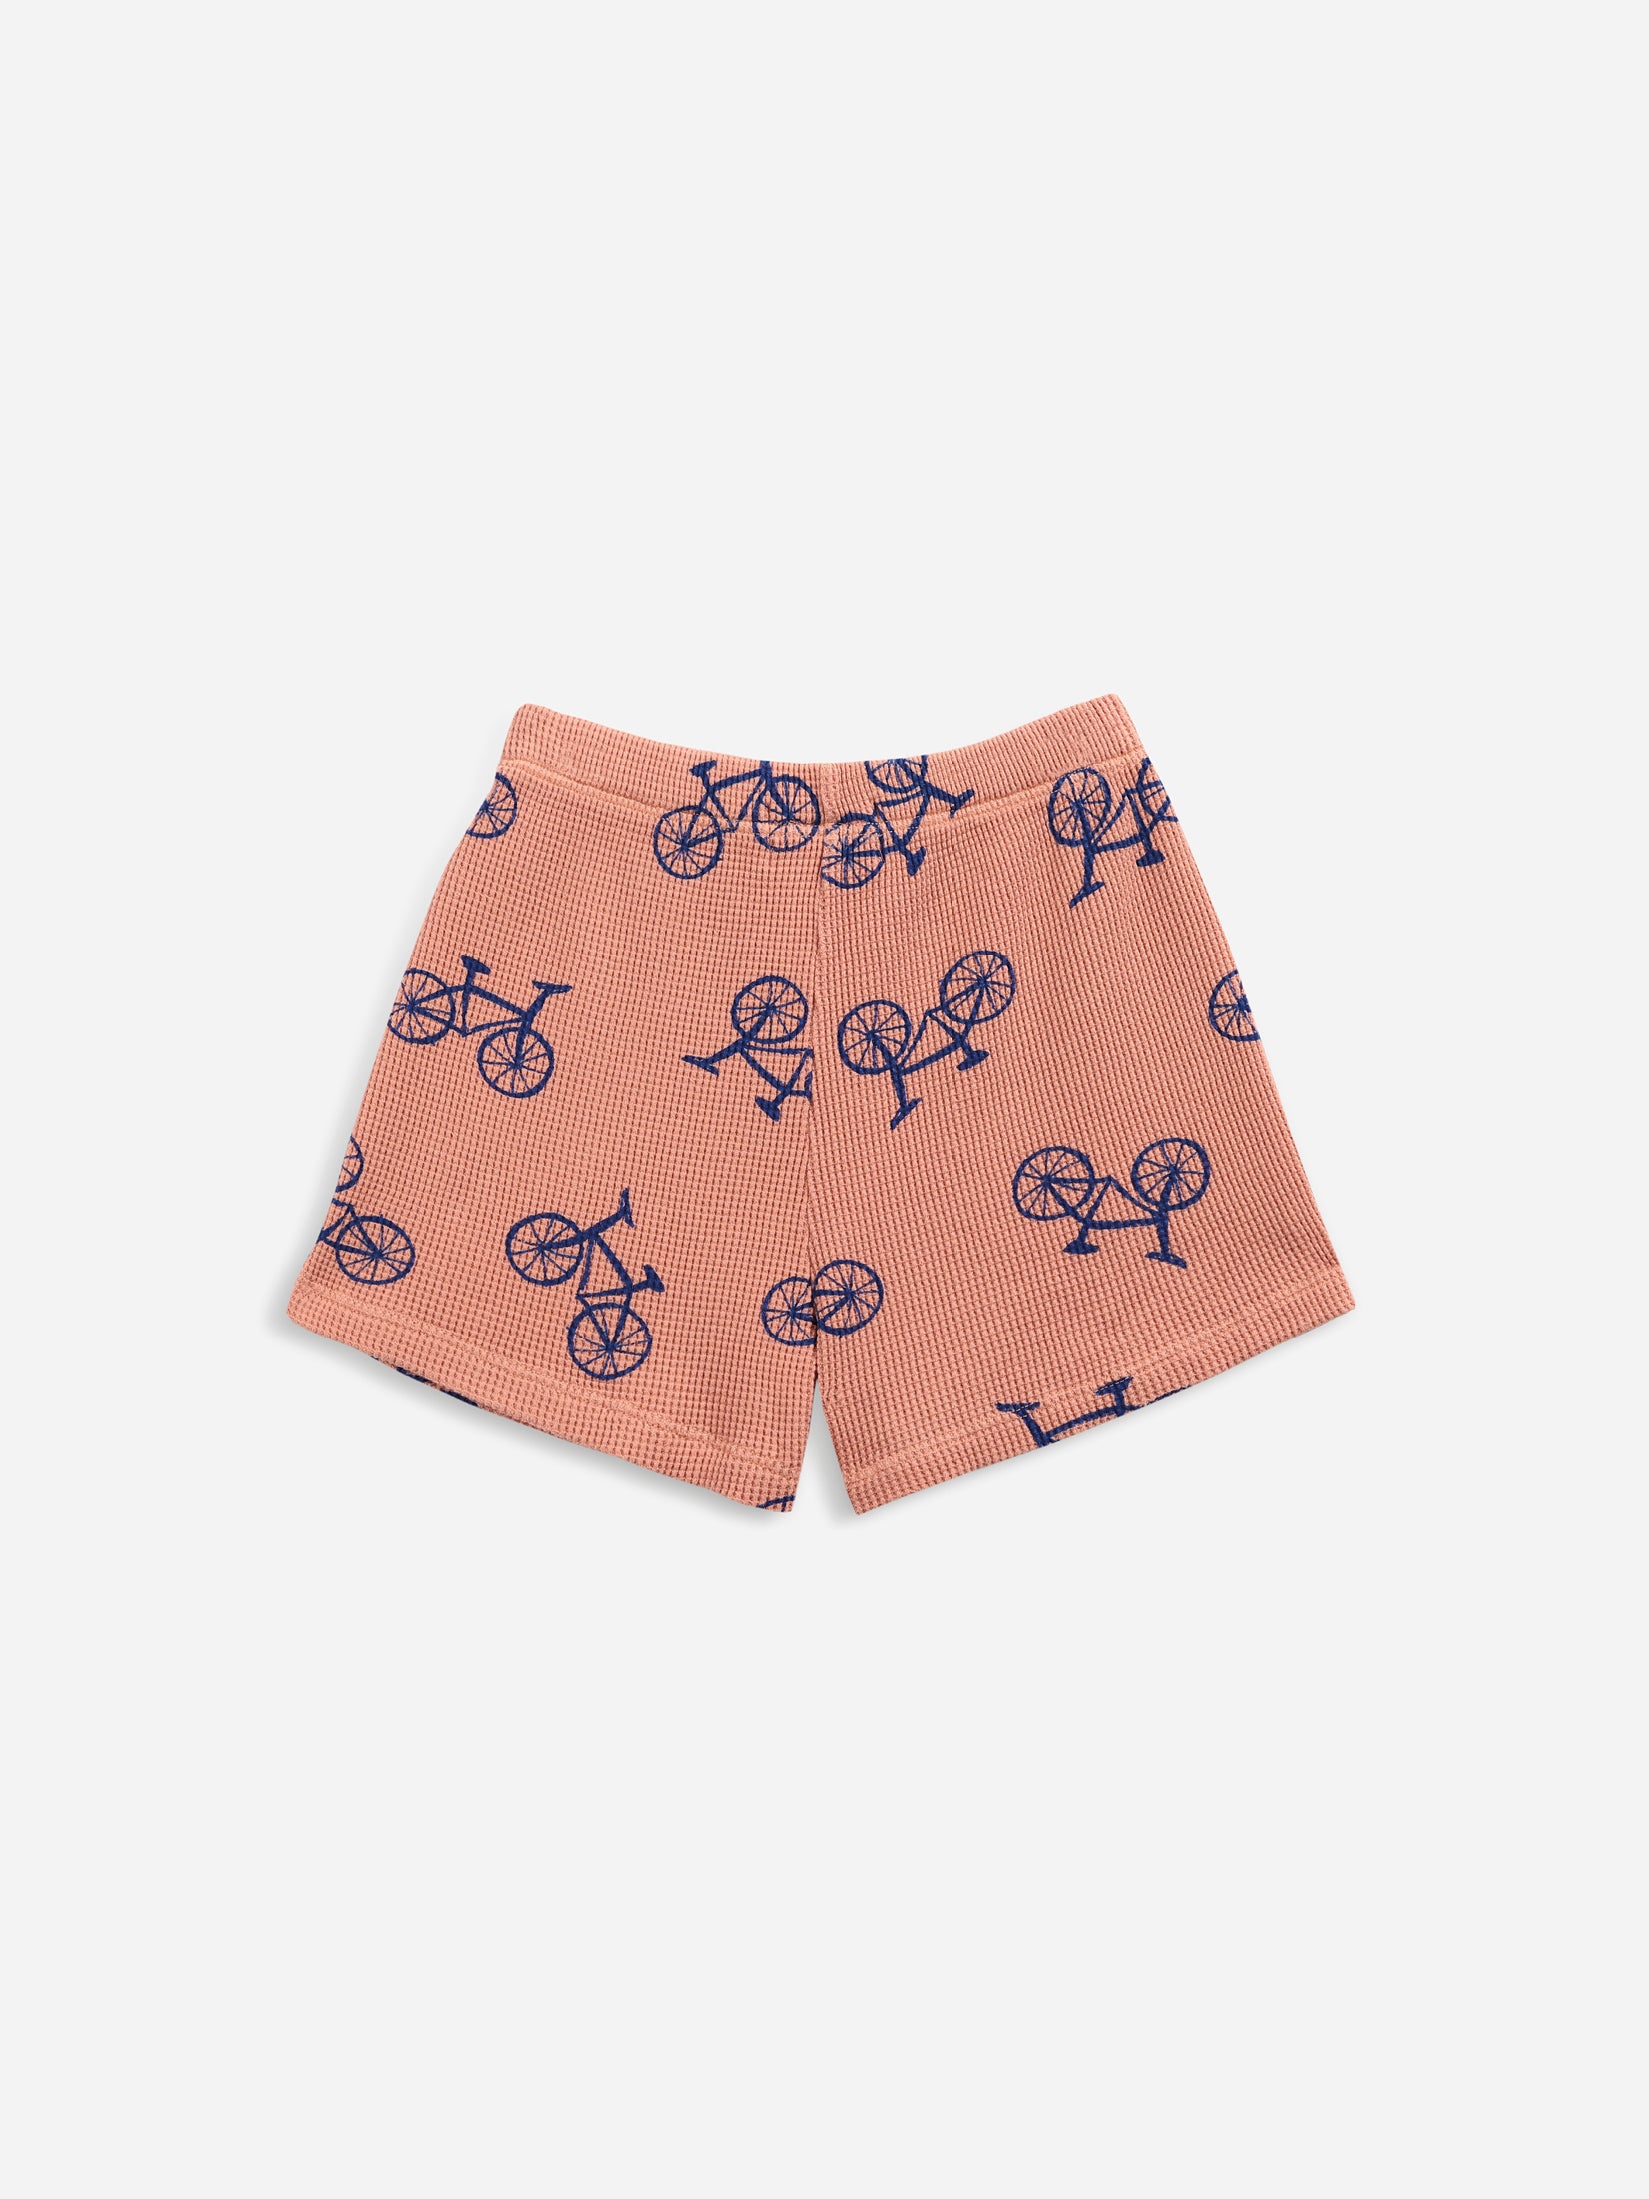 BOBO CHOSES BICYCLE ALL OVER SHORTS